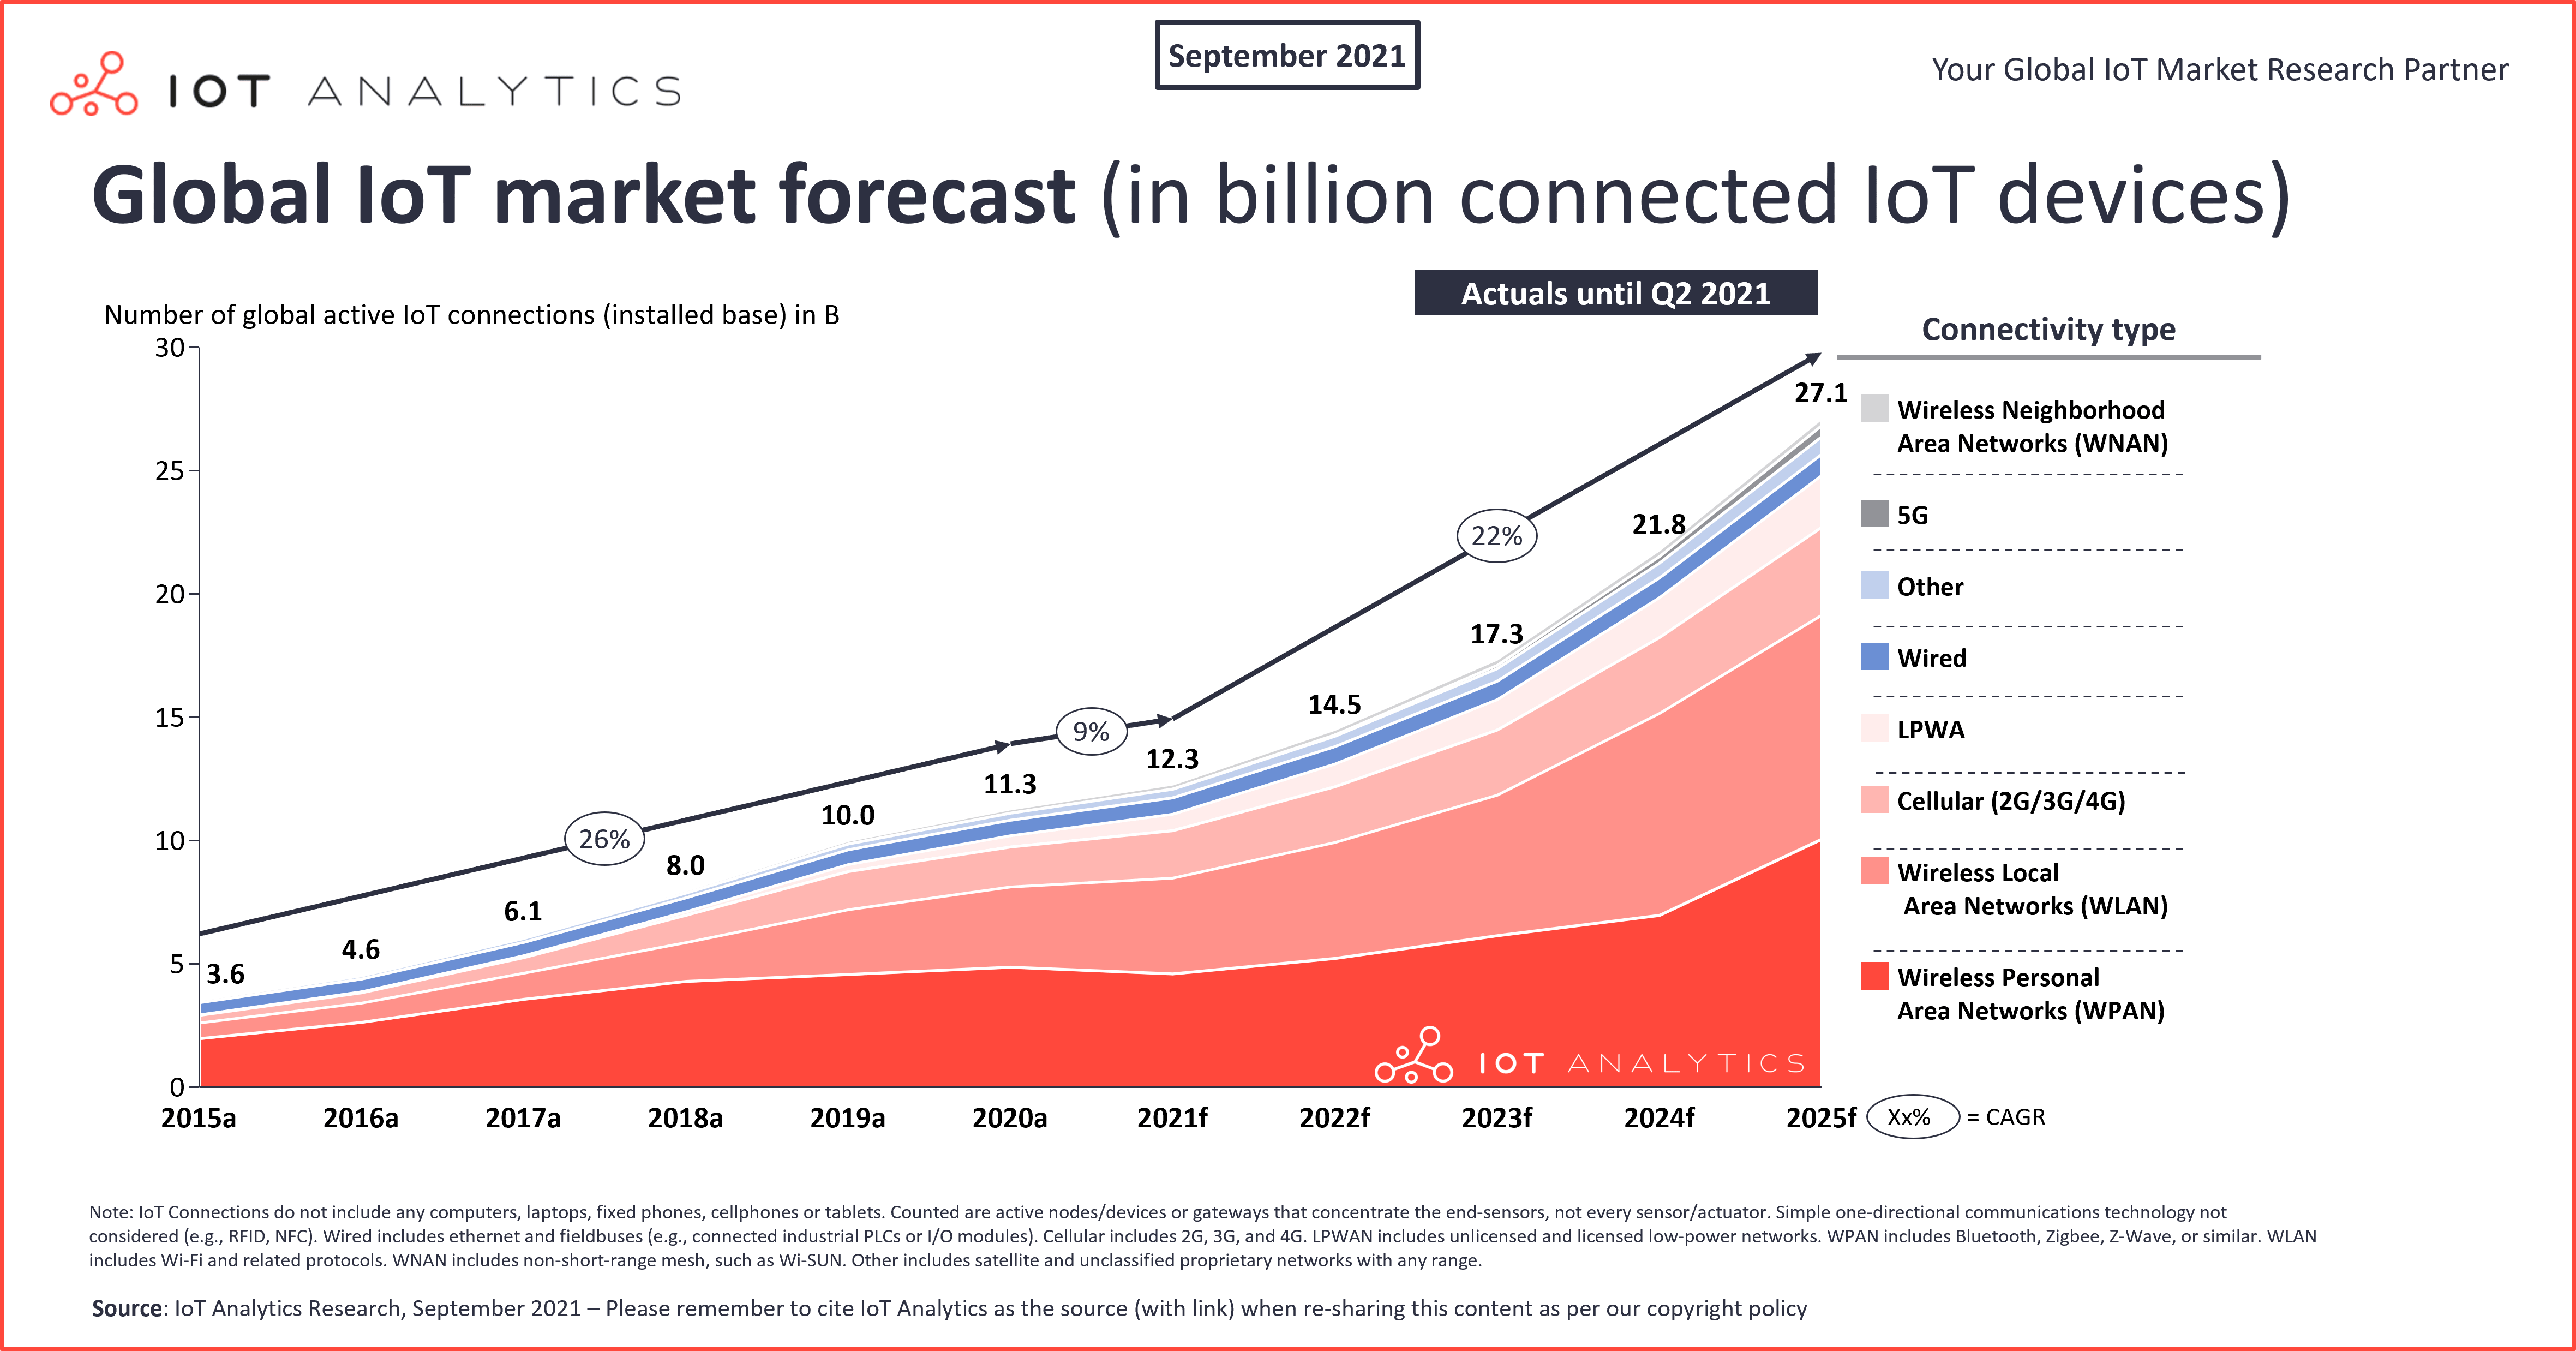 IoT Forecast Graph from 2015 until 2025